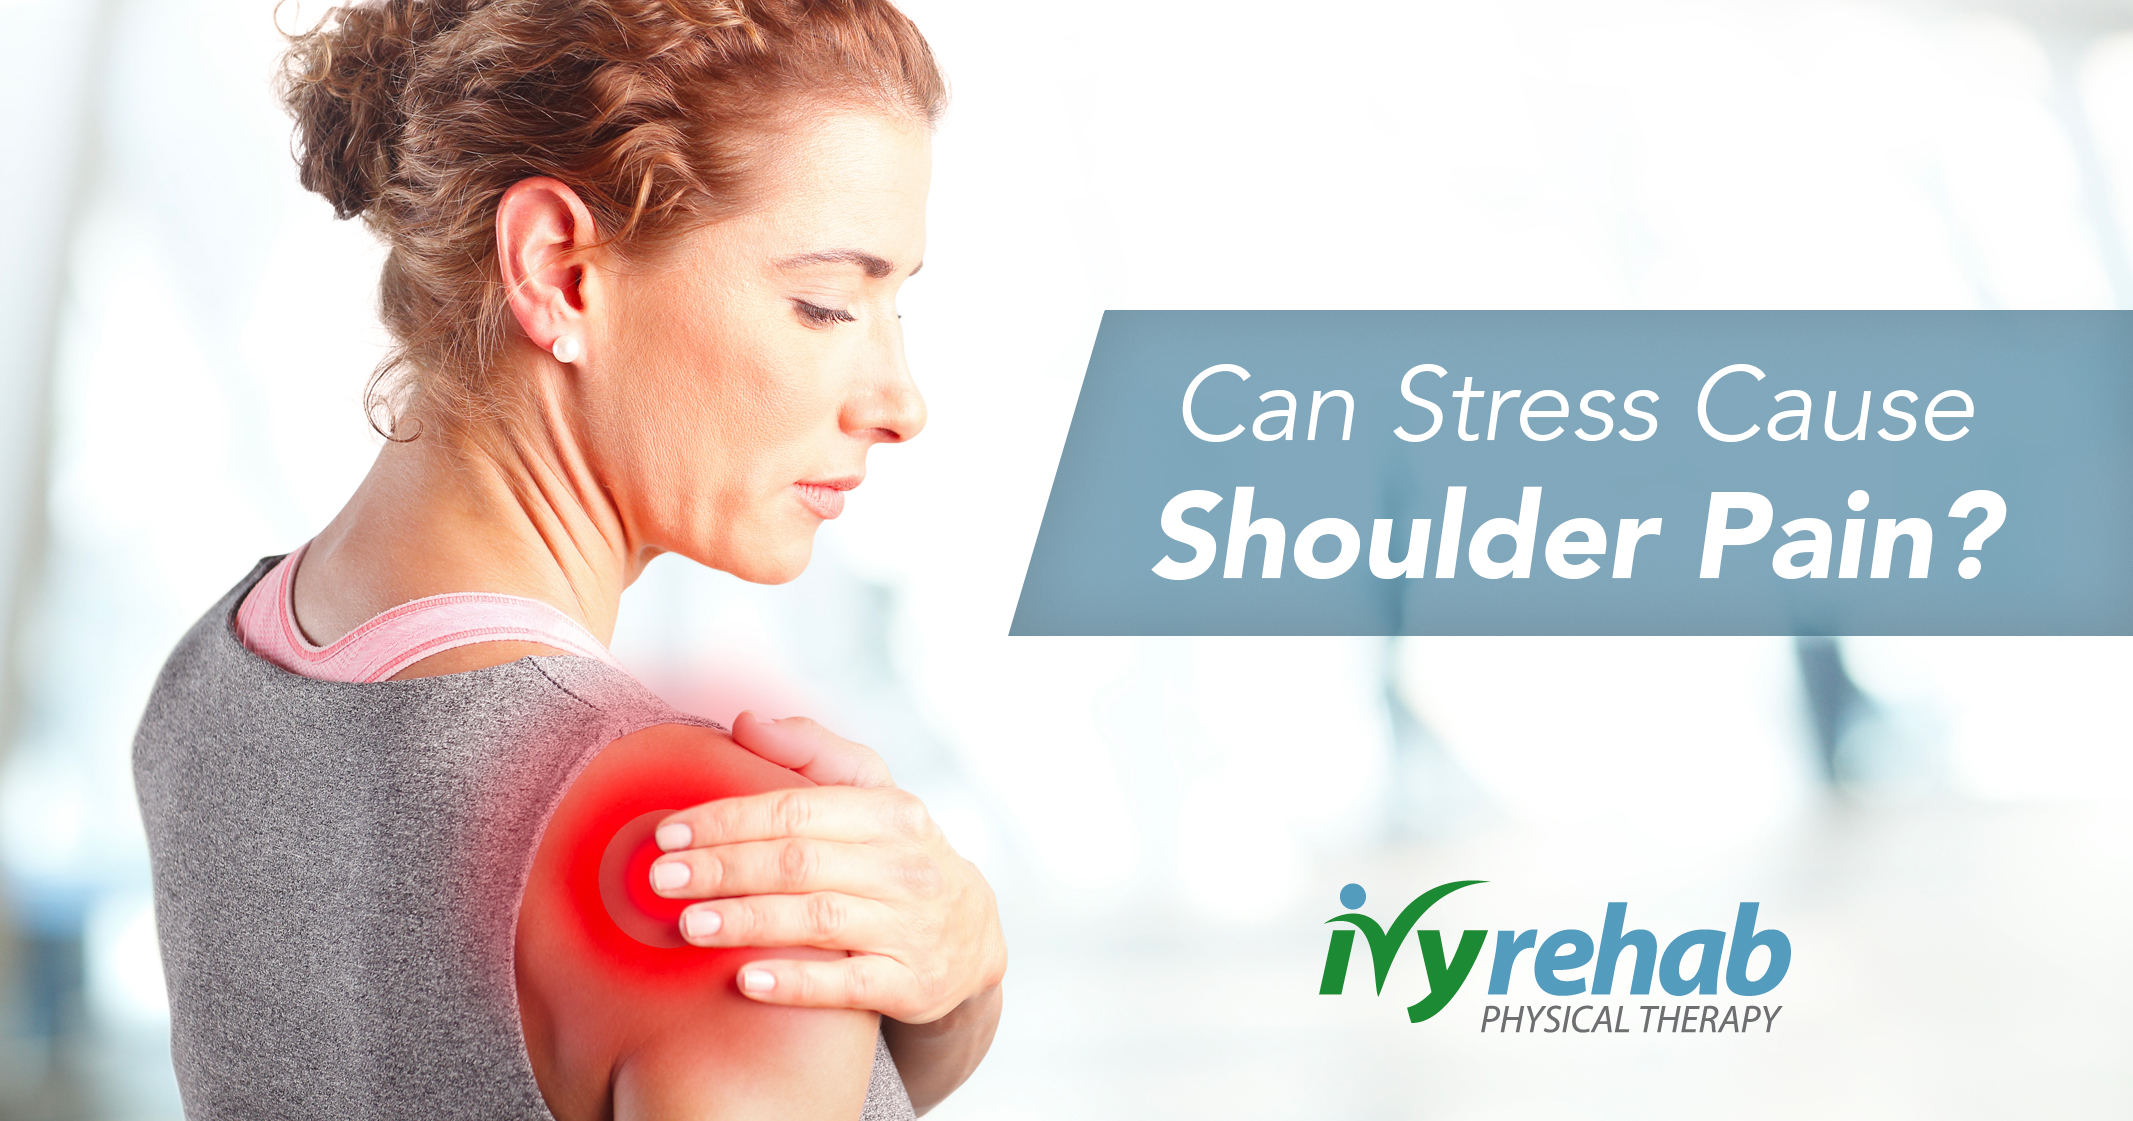 Can stress cause shoulder pain?